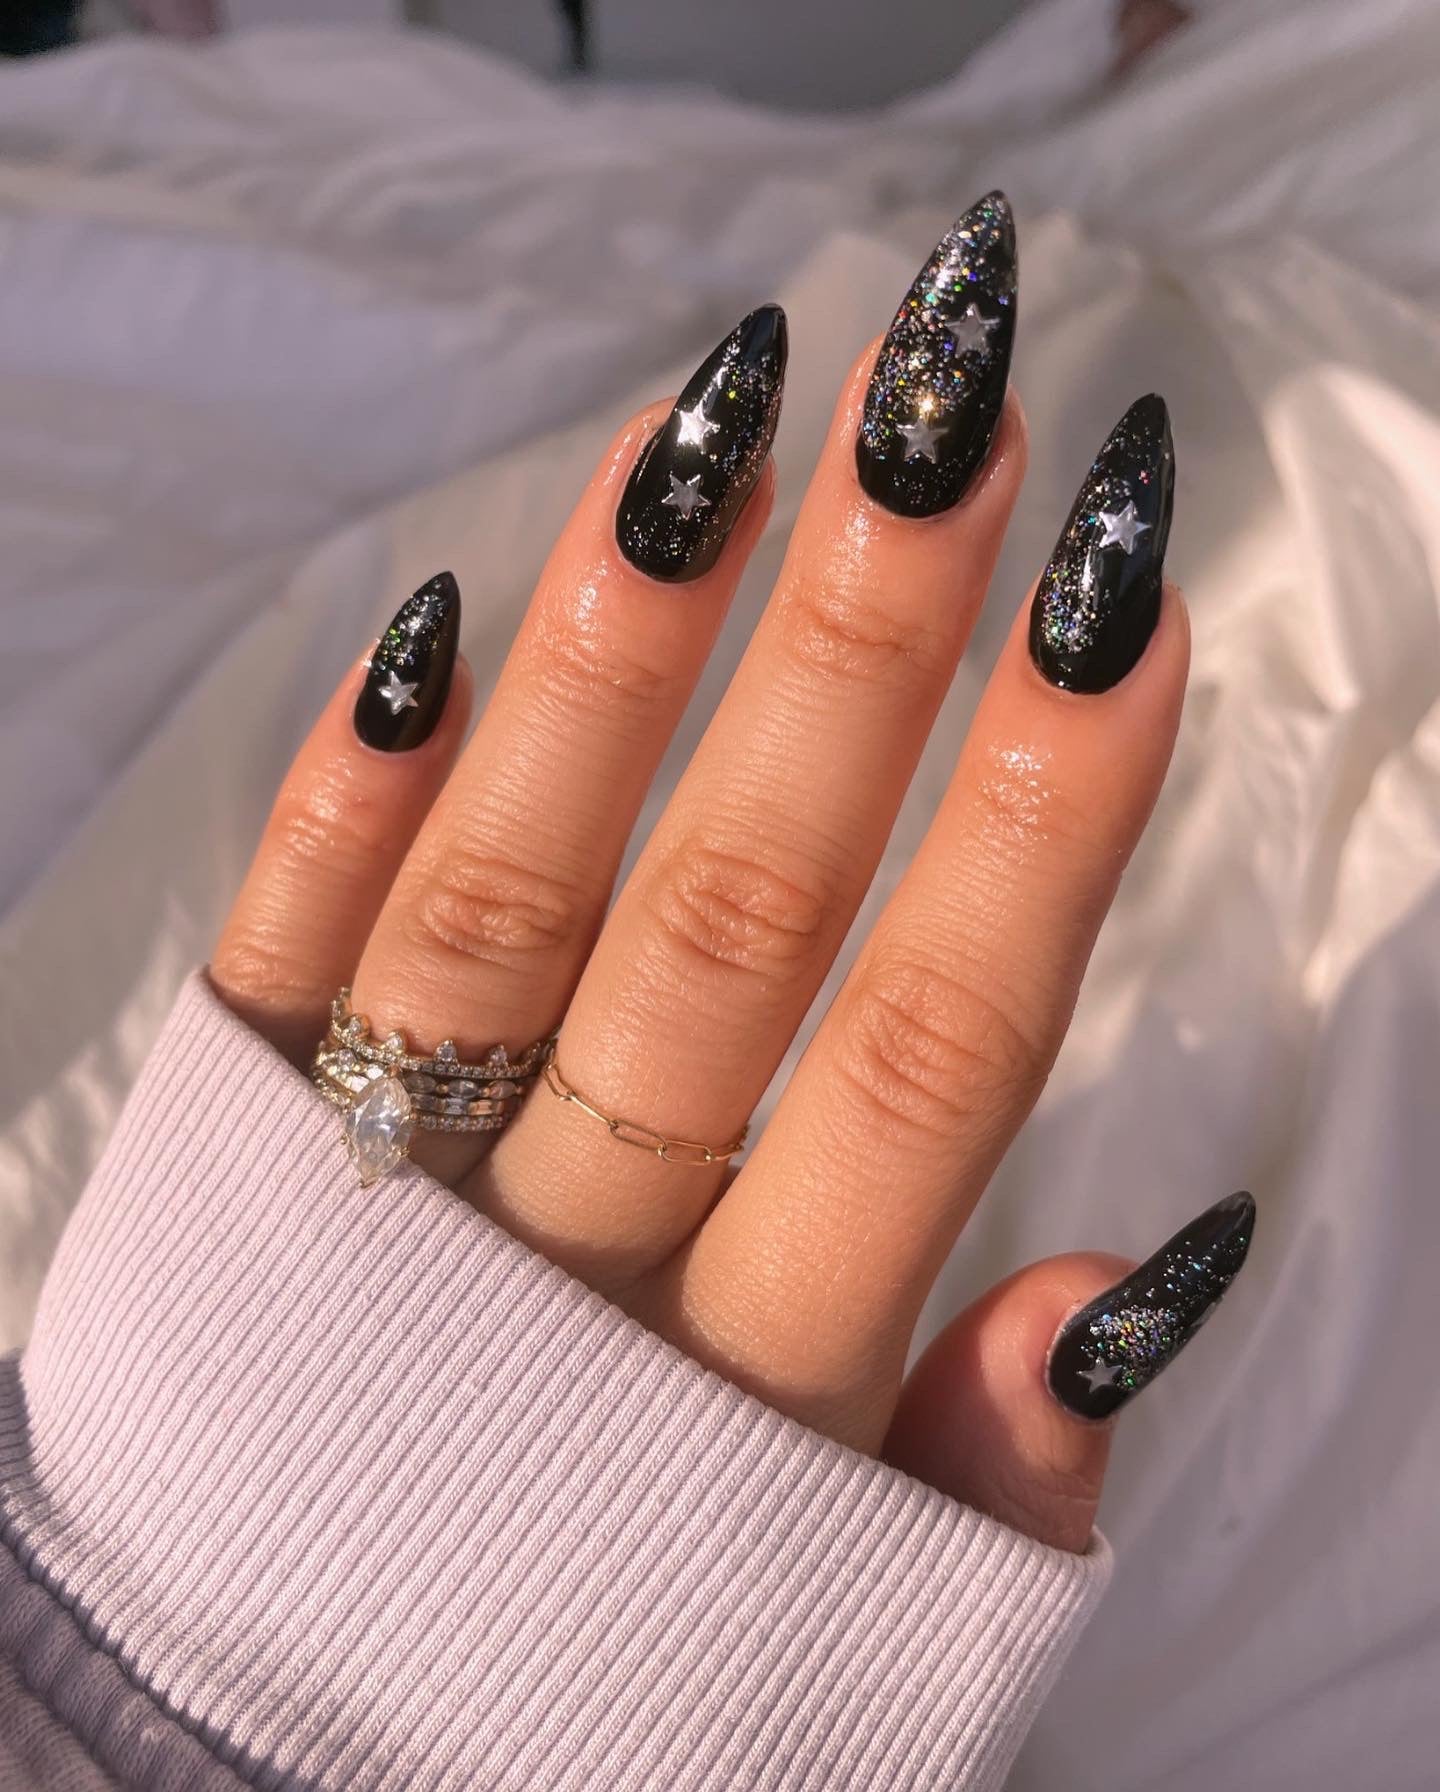 Silver nail art stickers on black nails